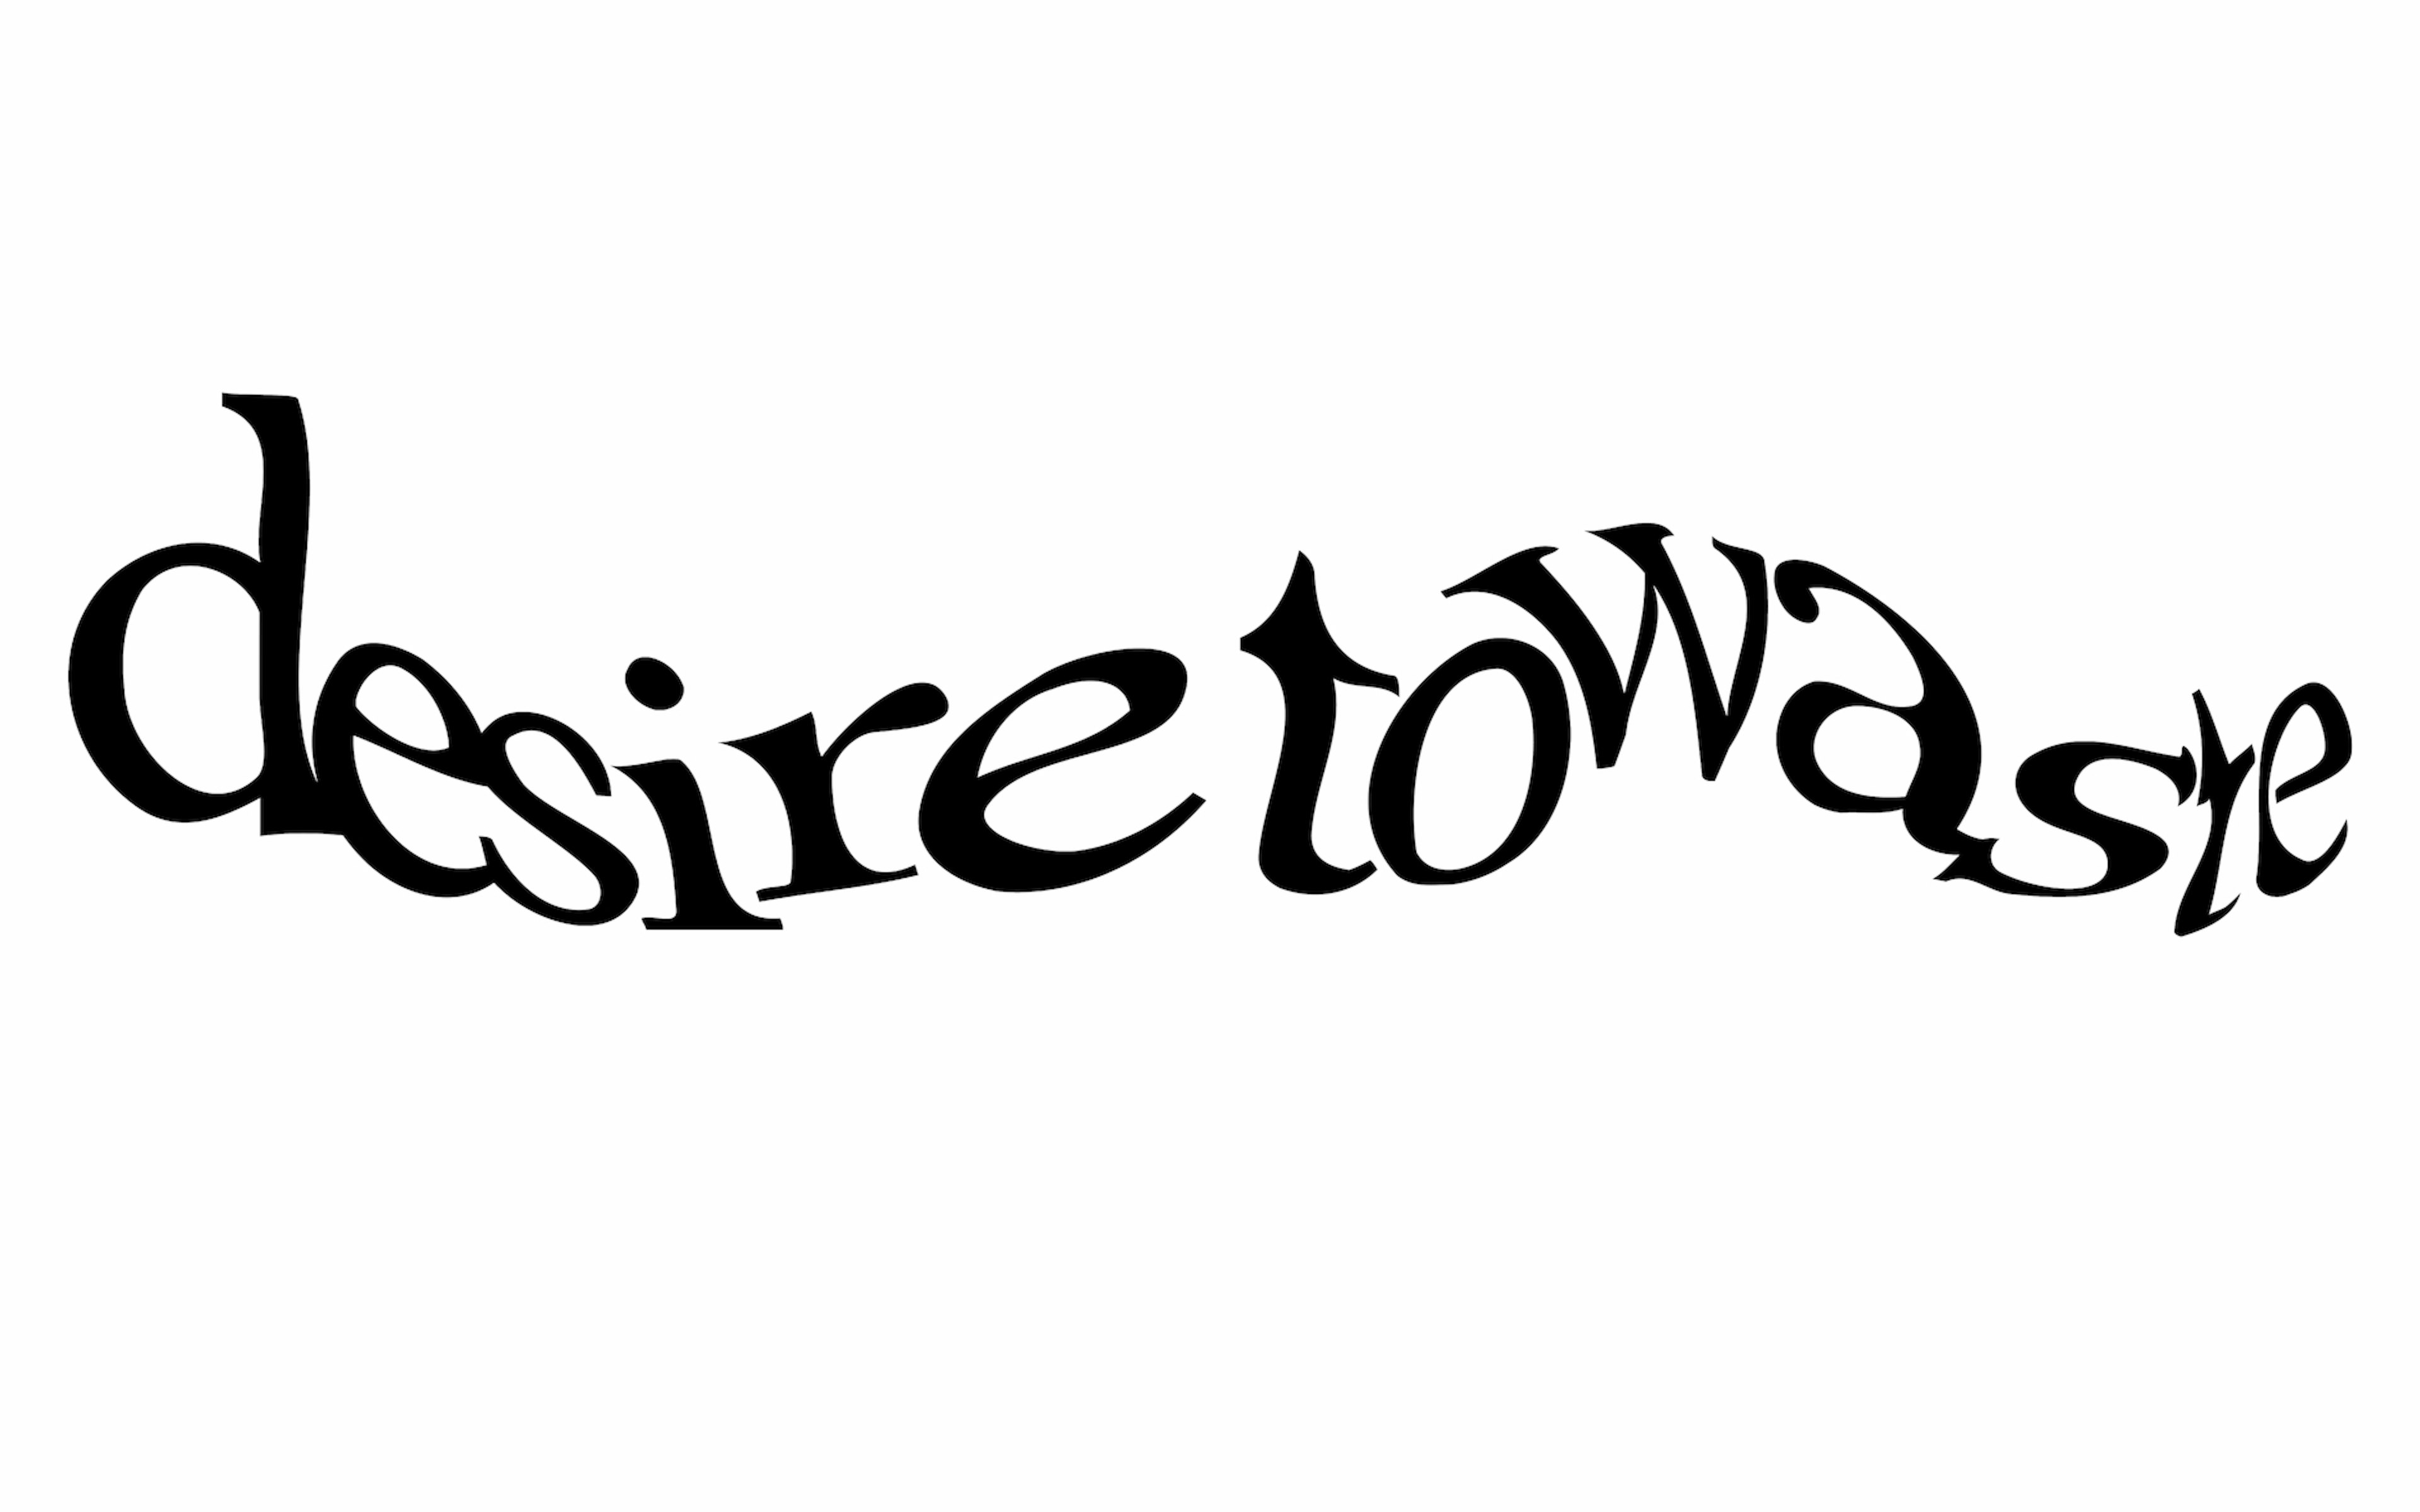 Logo ‘Desire to Waste’ inspired by CAPTCHA font/type.